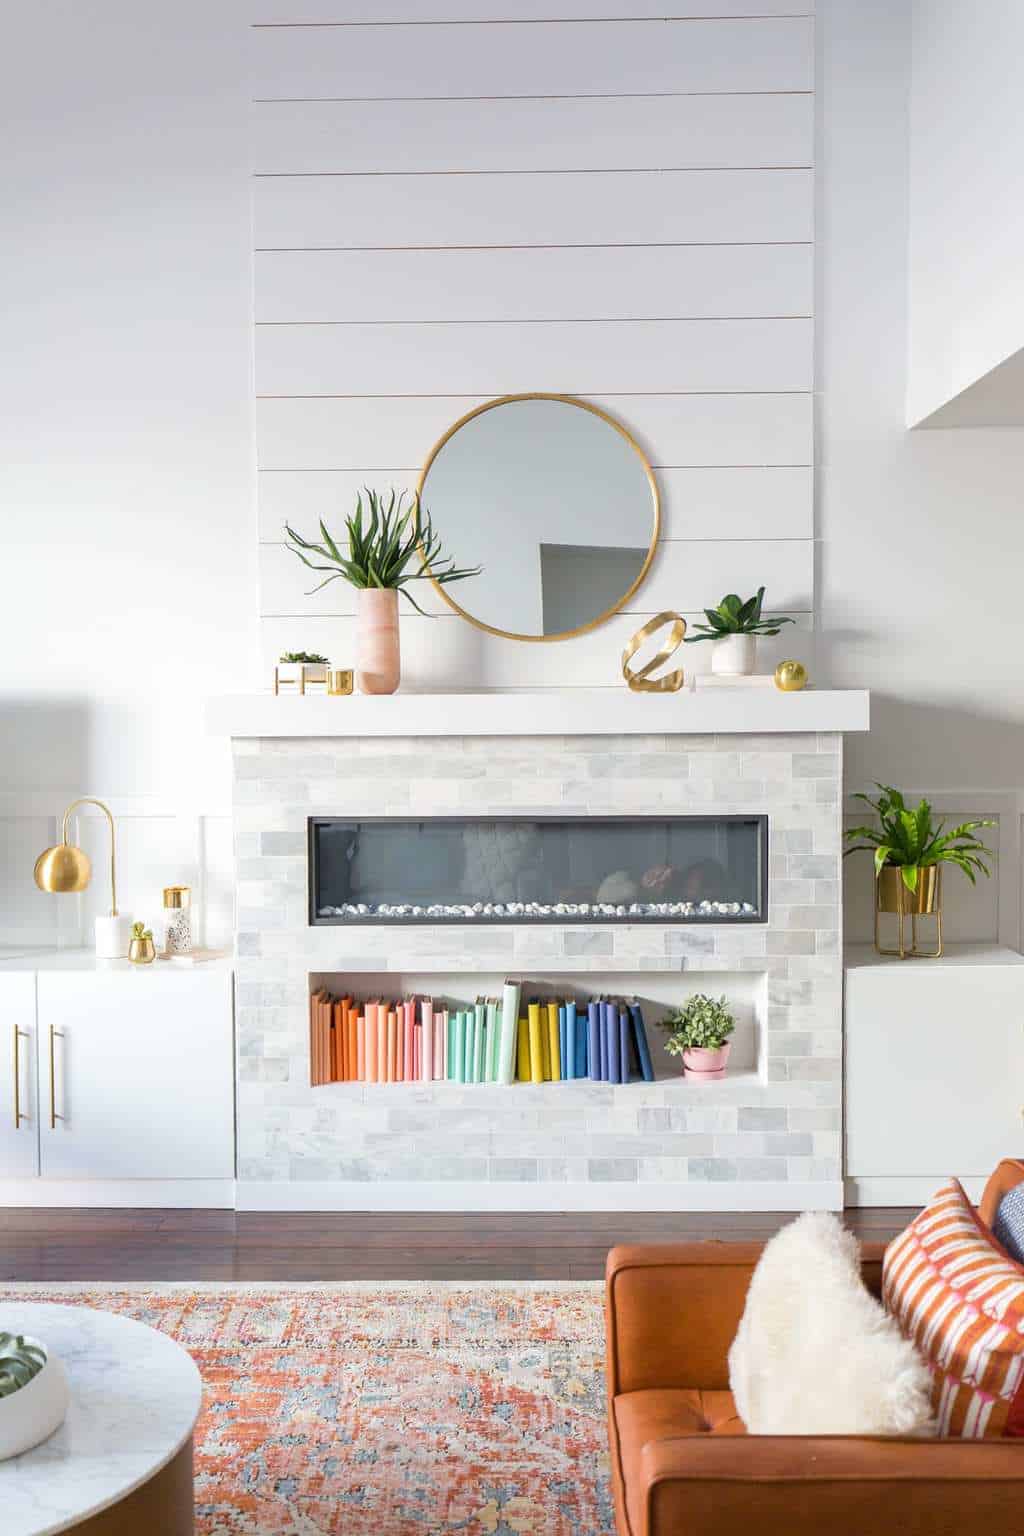 Big Reveal: We Finally Have Our Finished Living Room Makeover by top Houston lifestyle blogger Ashley Rose of Sugar & Cloth